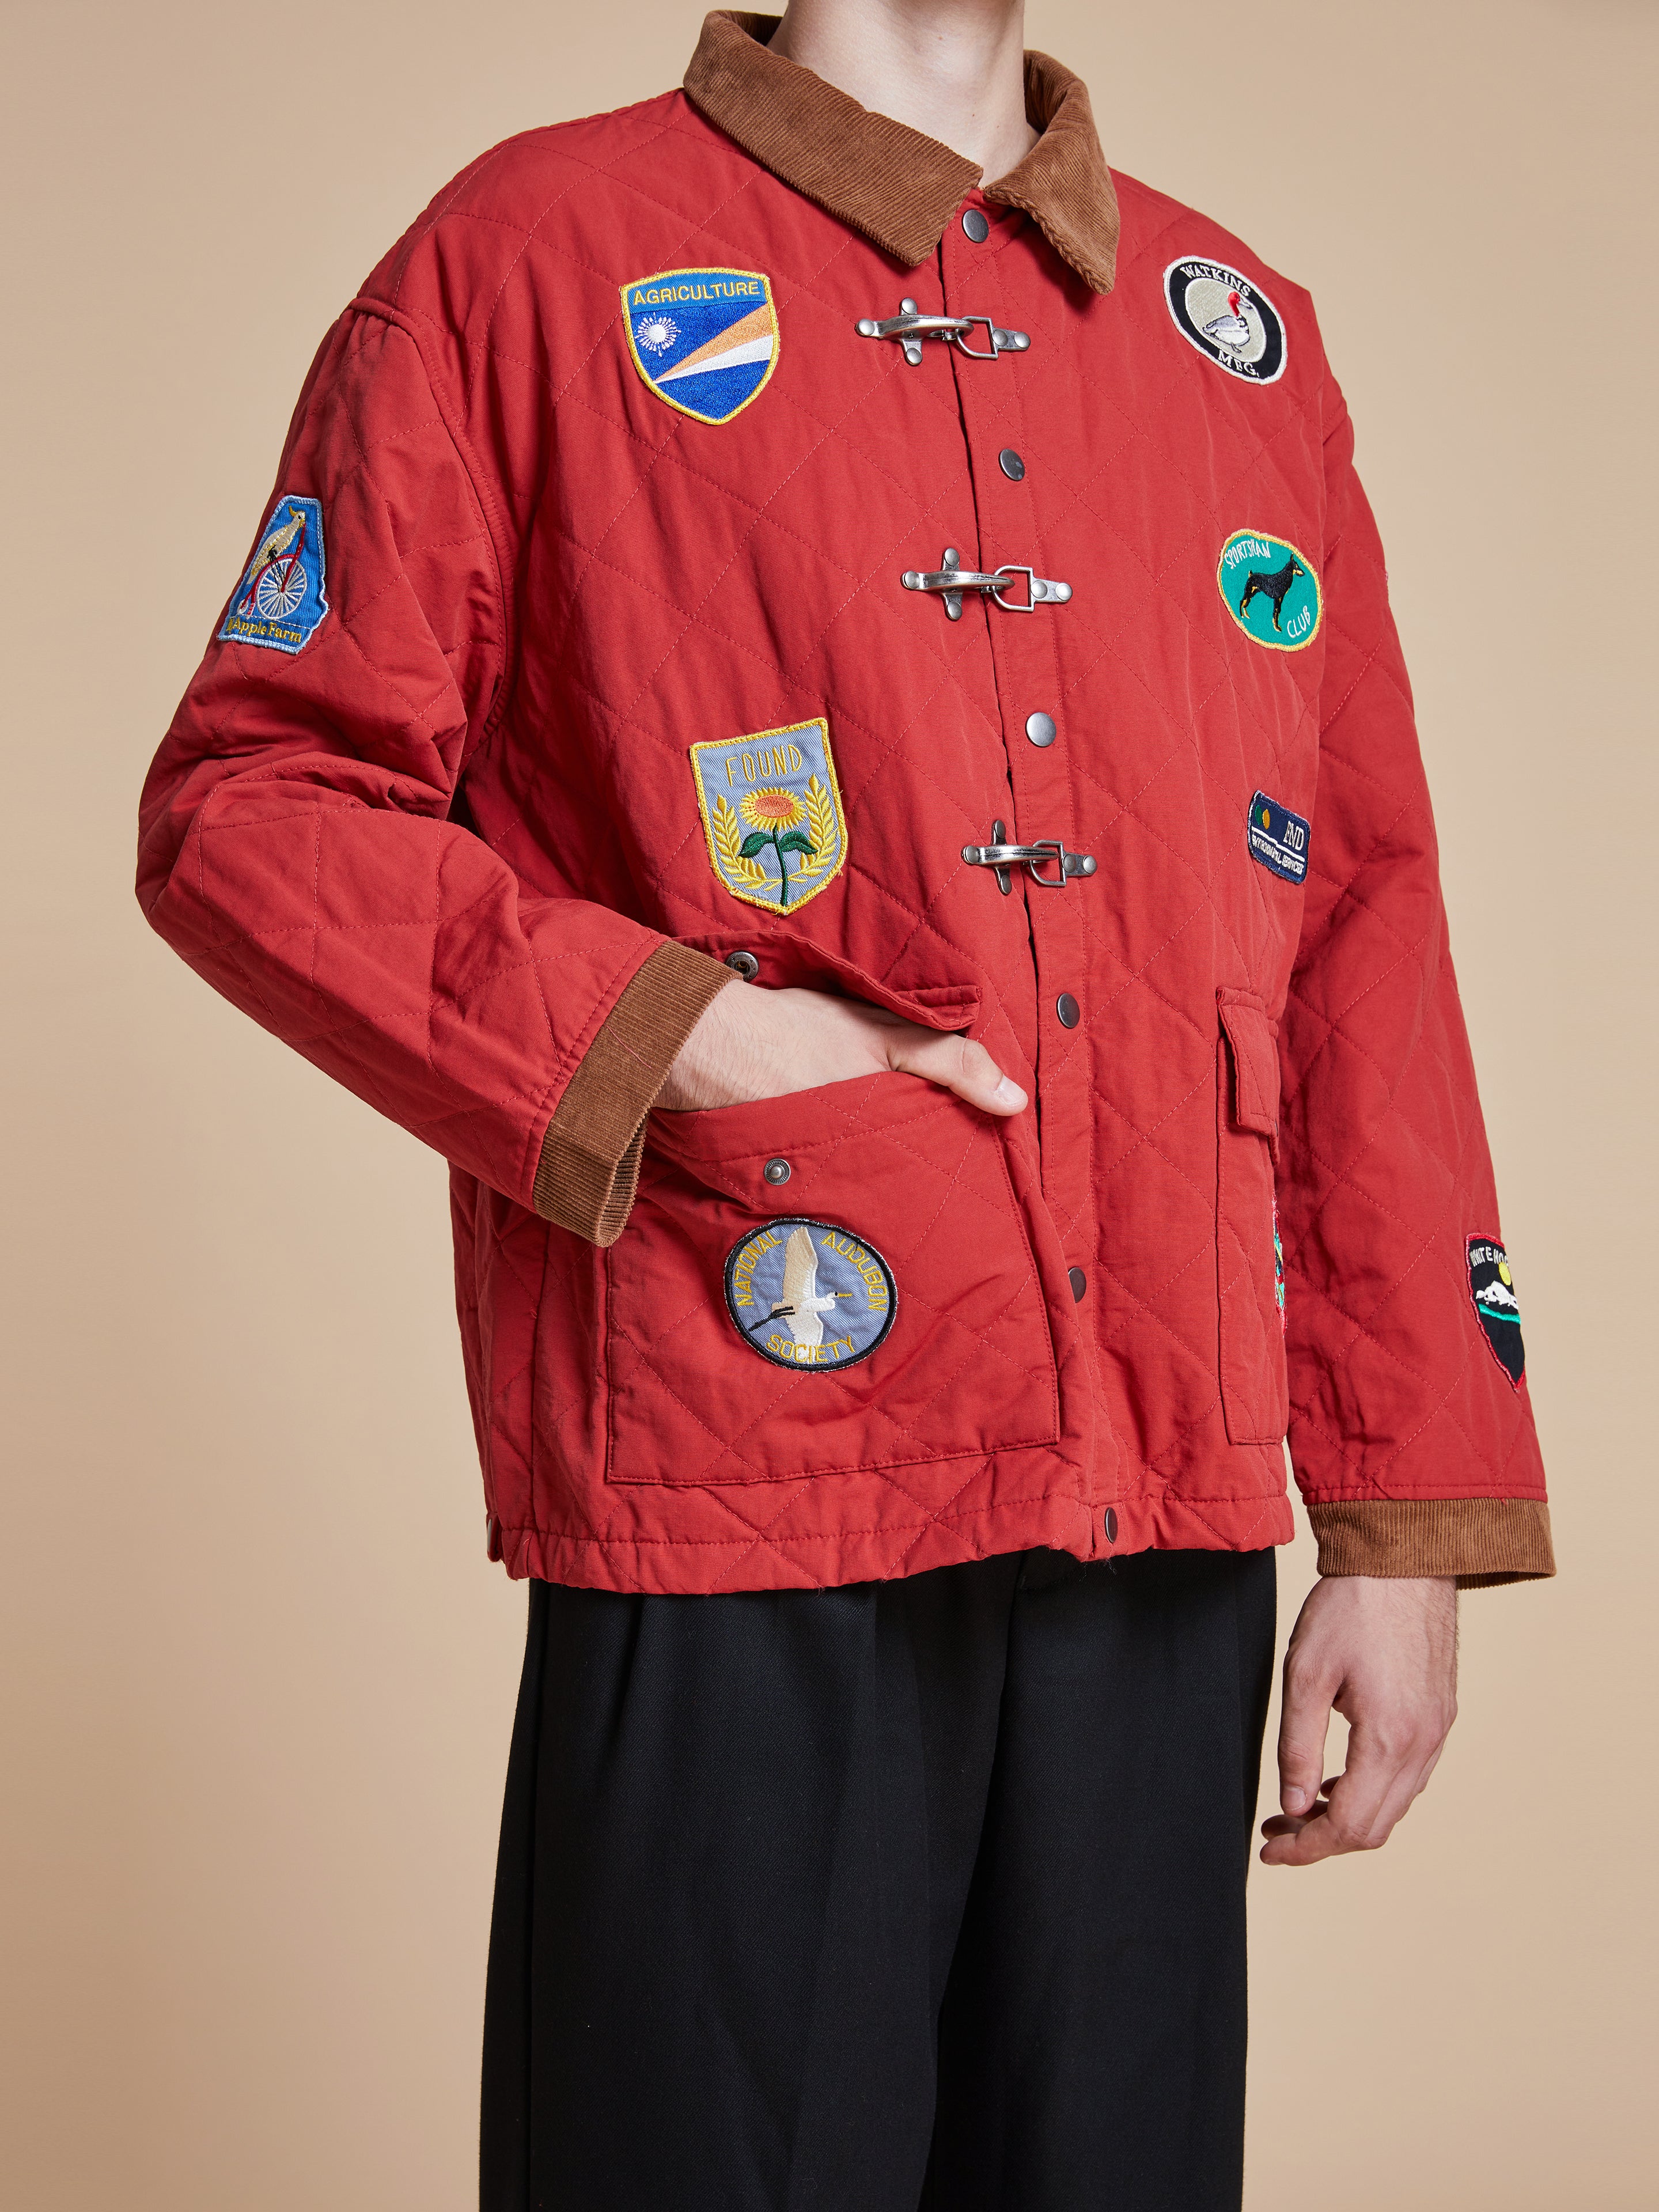 Farmstead Quilt Patch Jacket